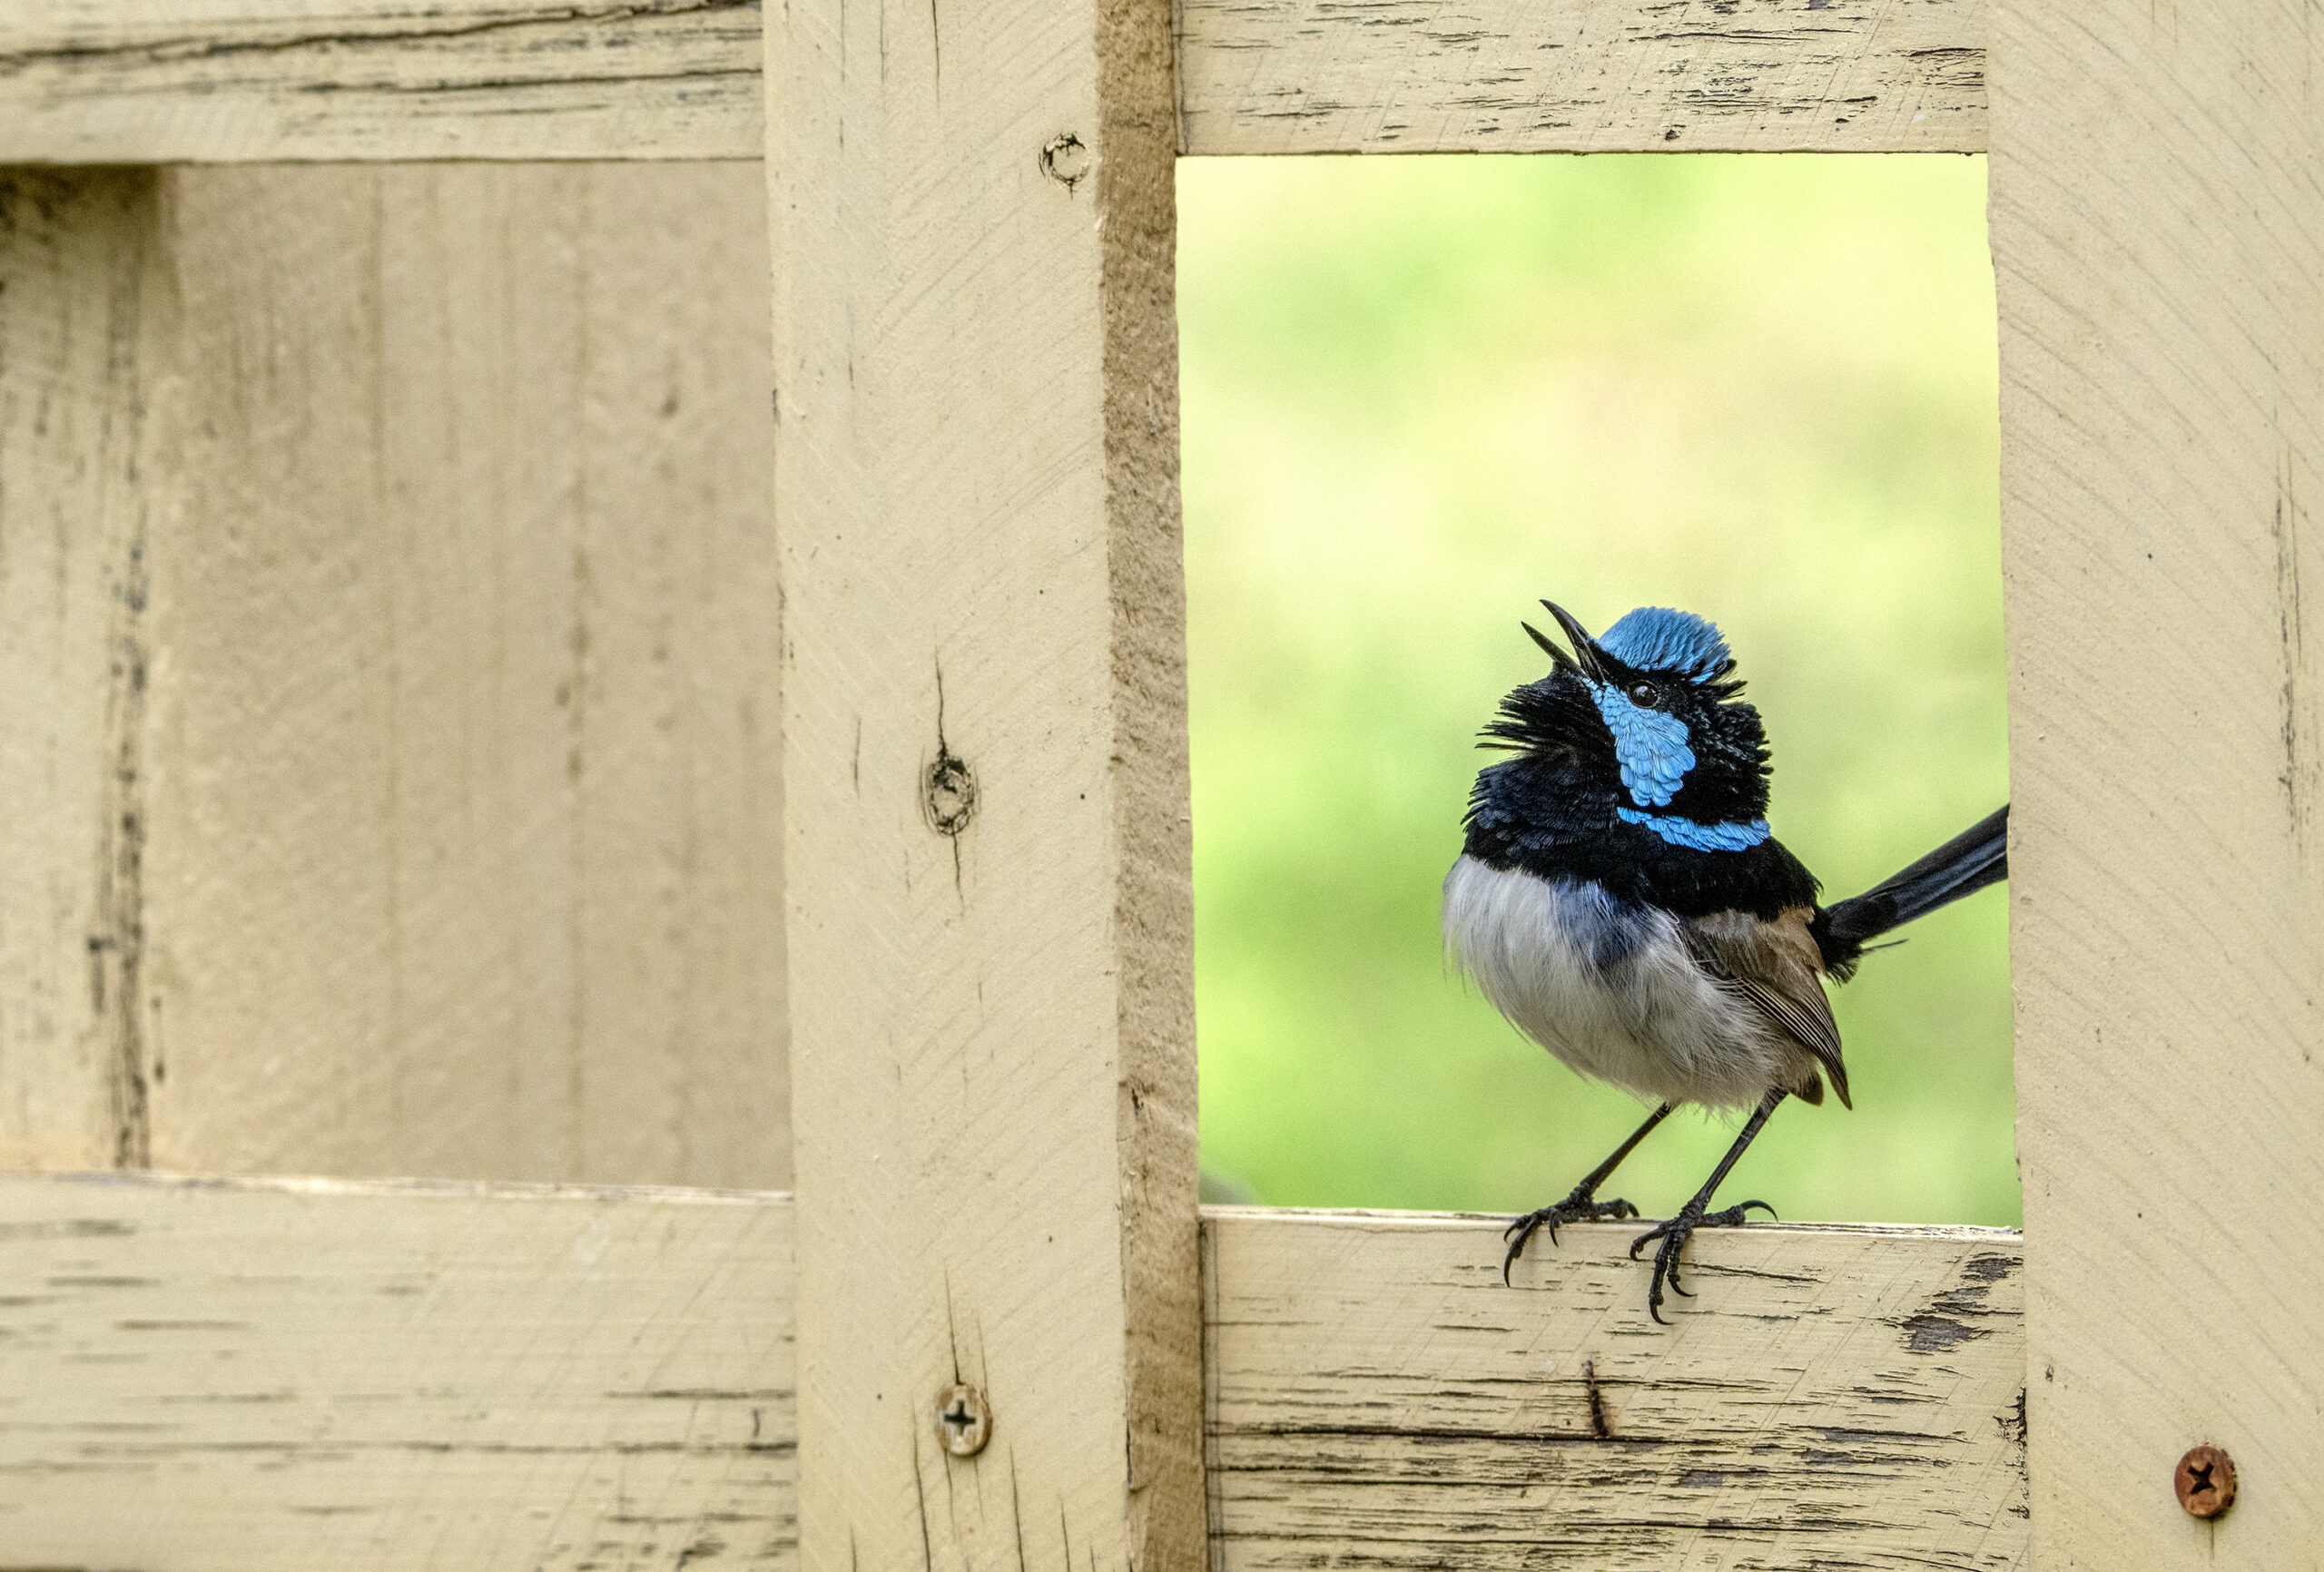 To the right of the frame, a blue and black male Superb Fairy-wren is perched on a gap in a wooden fence. His face is pointing upwards as he calls.